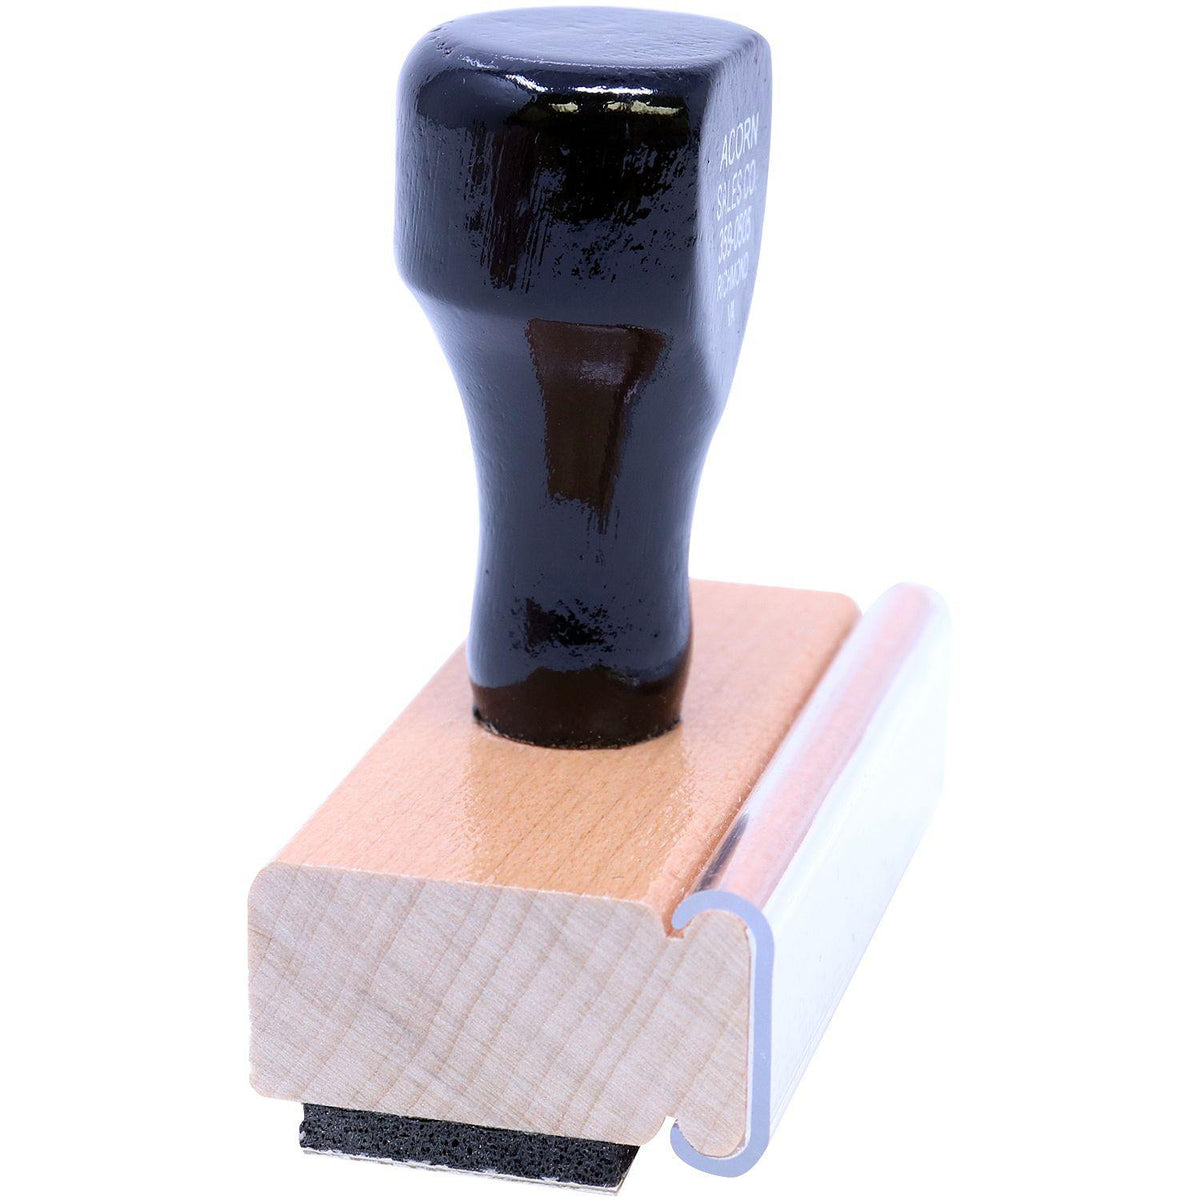 Side View of Large Attorney Client Privilege Rubber Stamp at an Angle